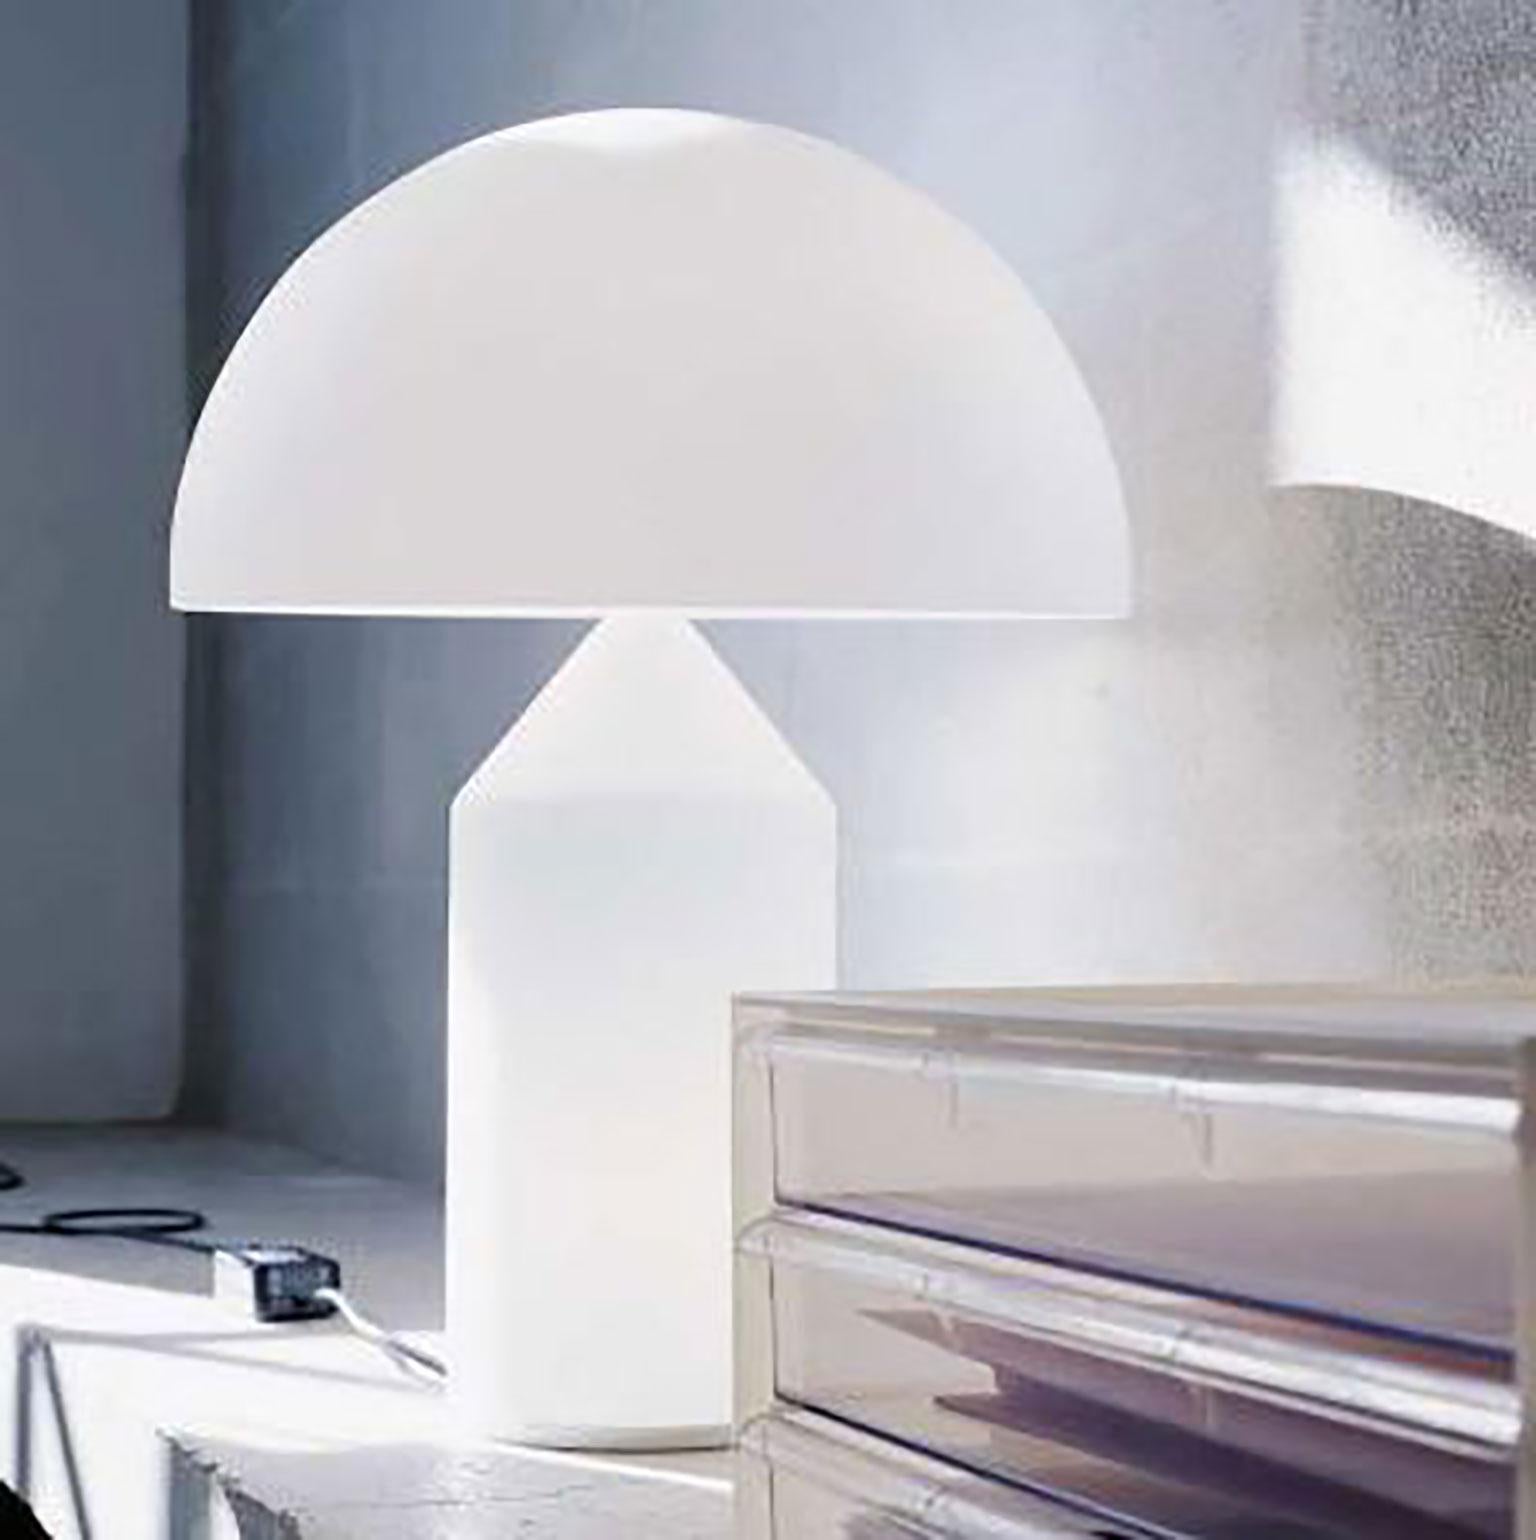 Atollo Table Lamp by Vico Magistretti for Oluce. The Atollo lamp has become an iconic representation of the table lamp. The simple cylinder, cone, and hemisphere combine in such a simple but strong way highlighting form follows function. The shade